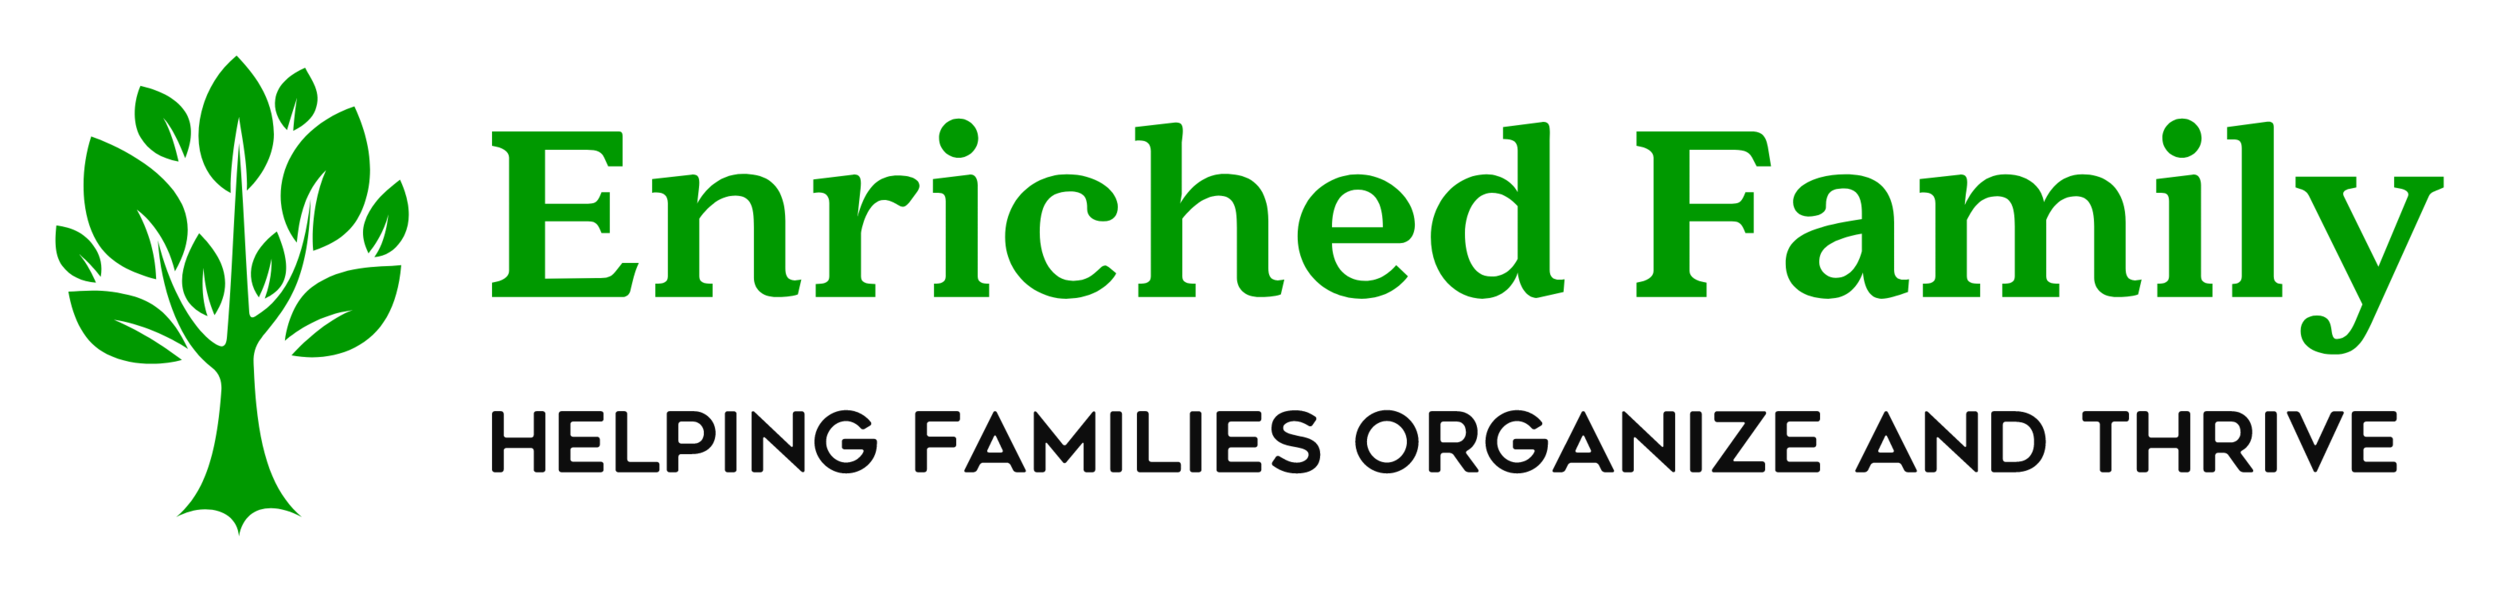 Enriched Family